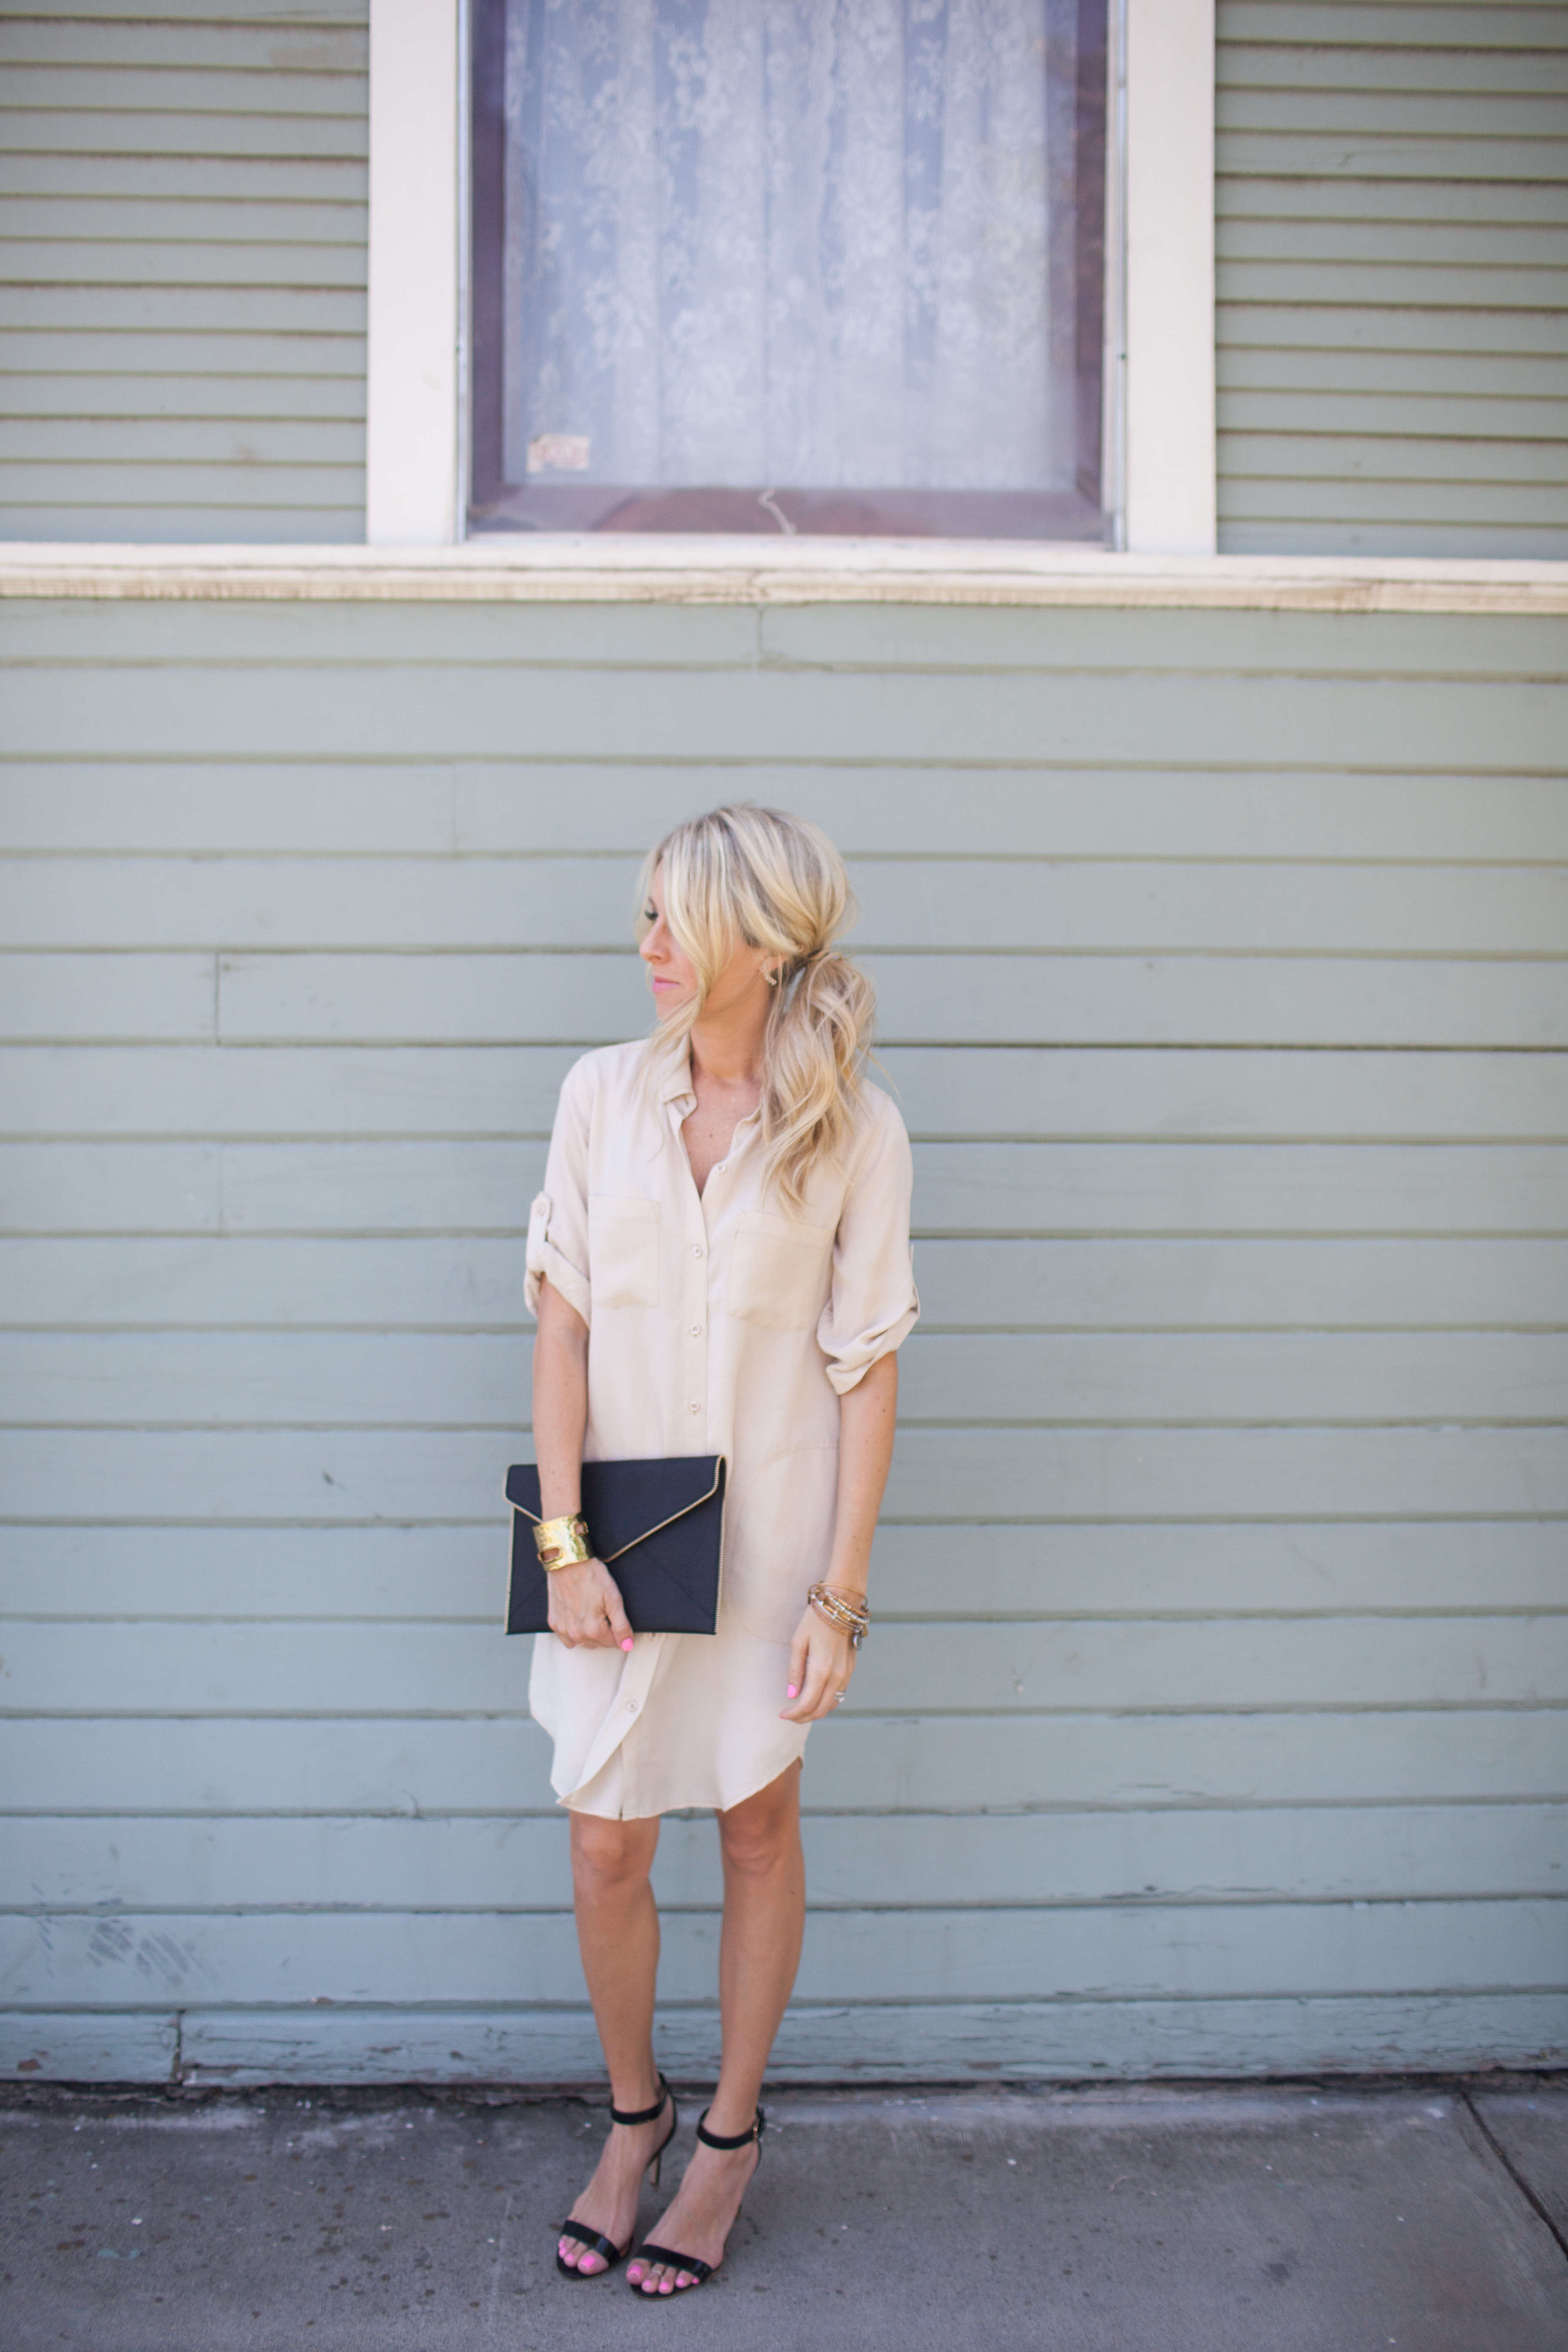 Kailee-Wright-shirtdress-nordstrom-12